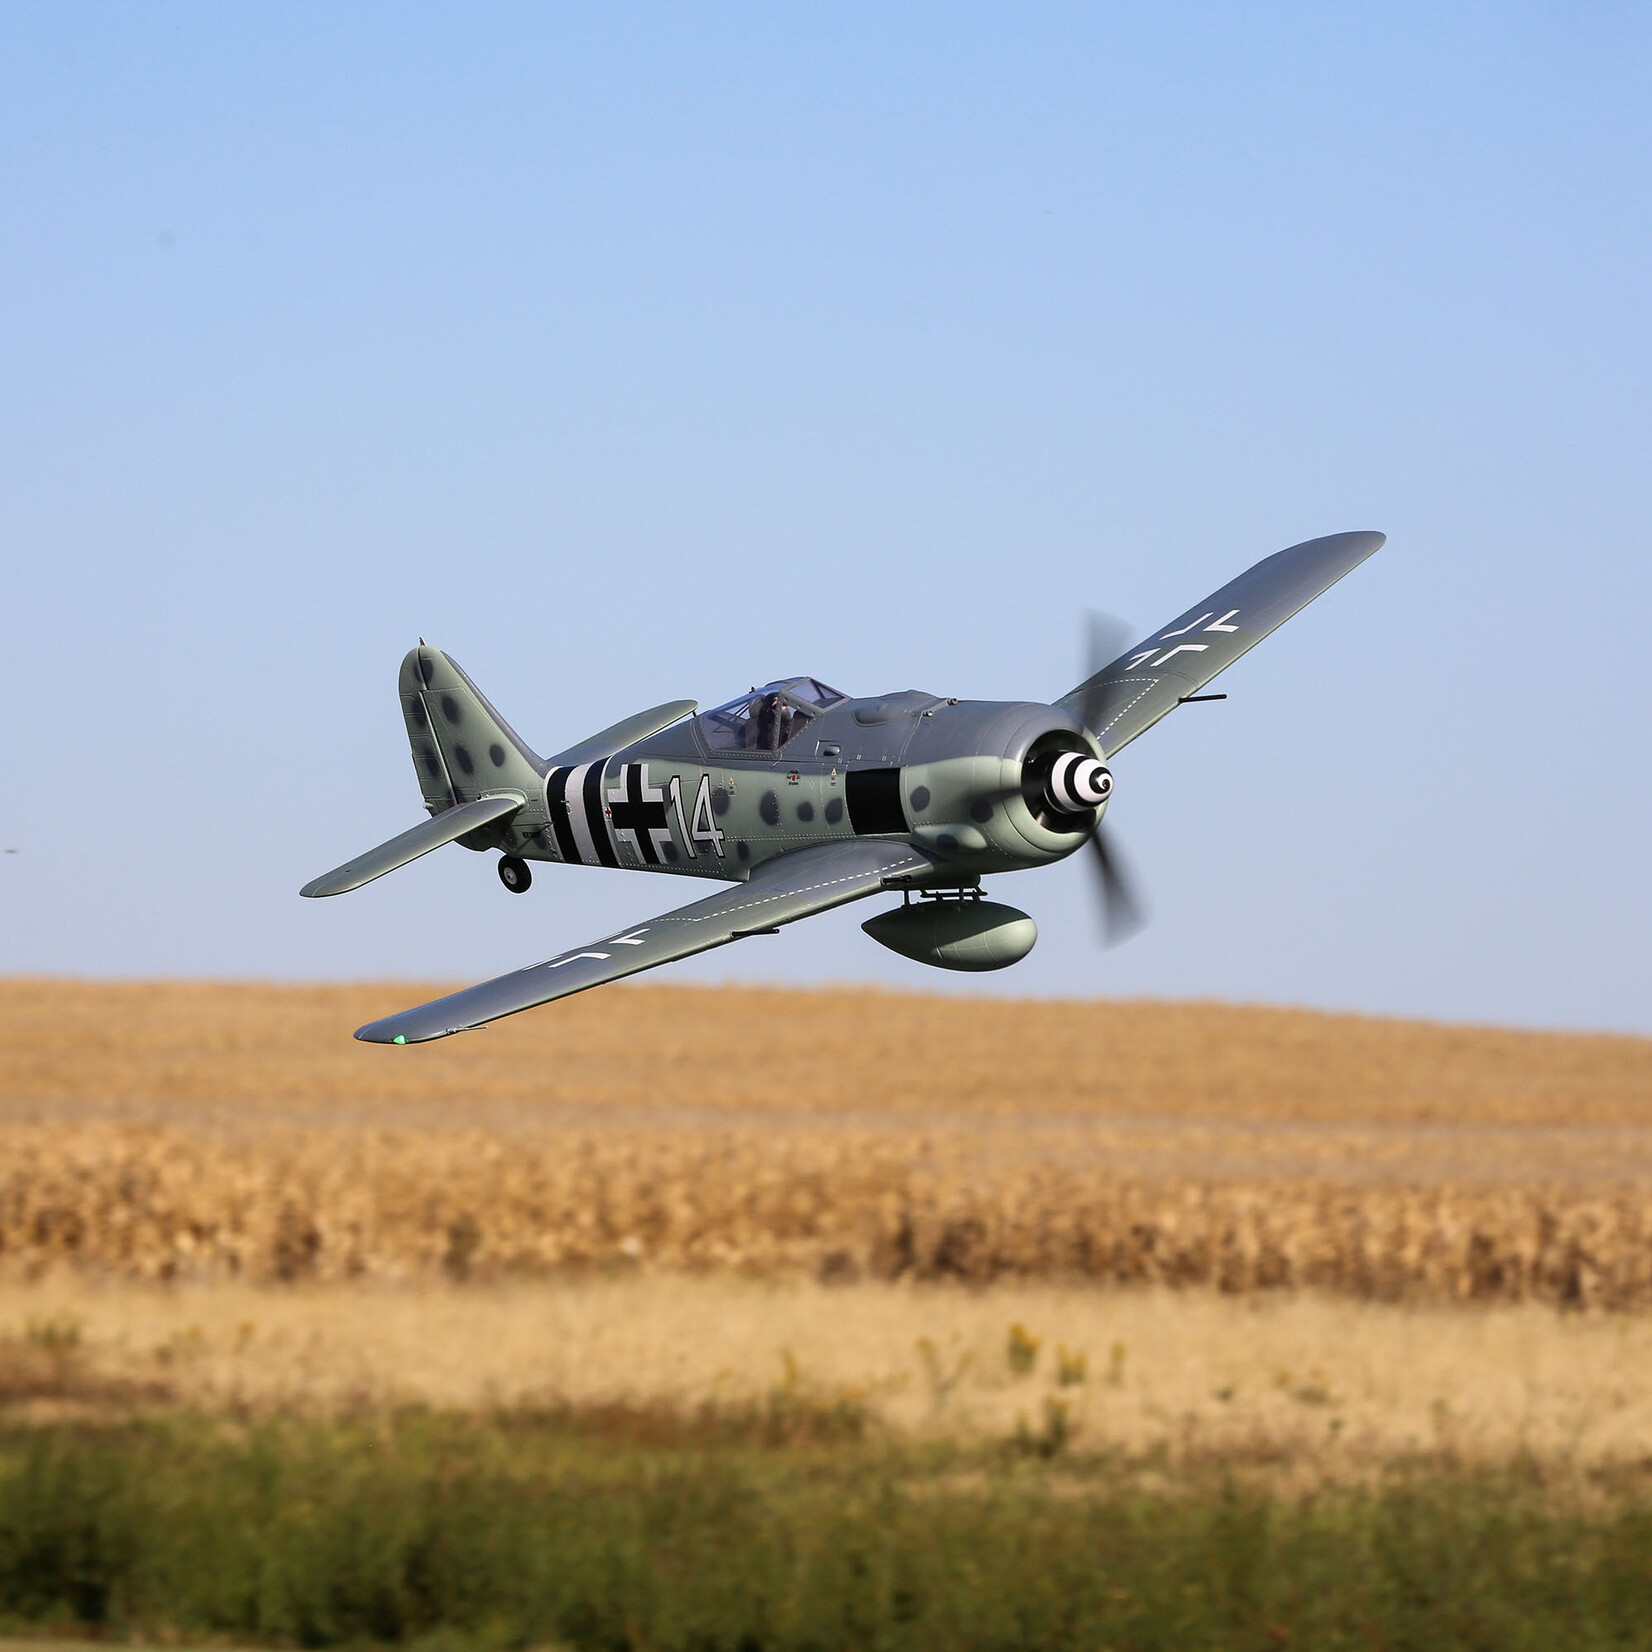 E-Flite Focke-Wulf Fw 190A 1.5m Smart BNF Basic with AS3X and SAFE Select